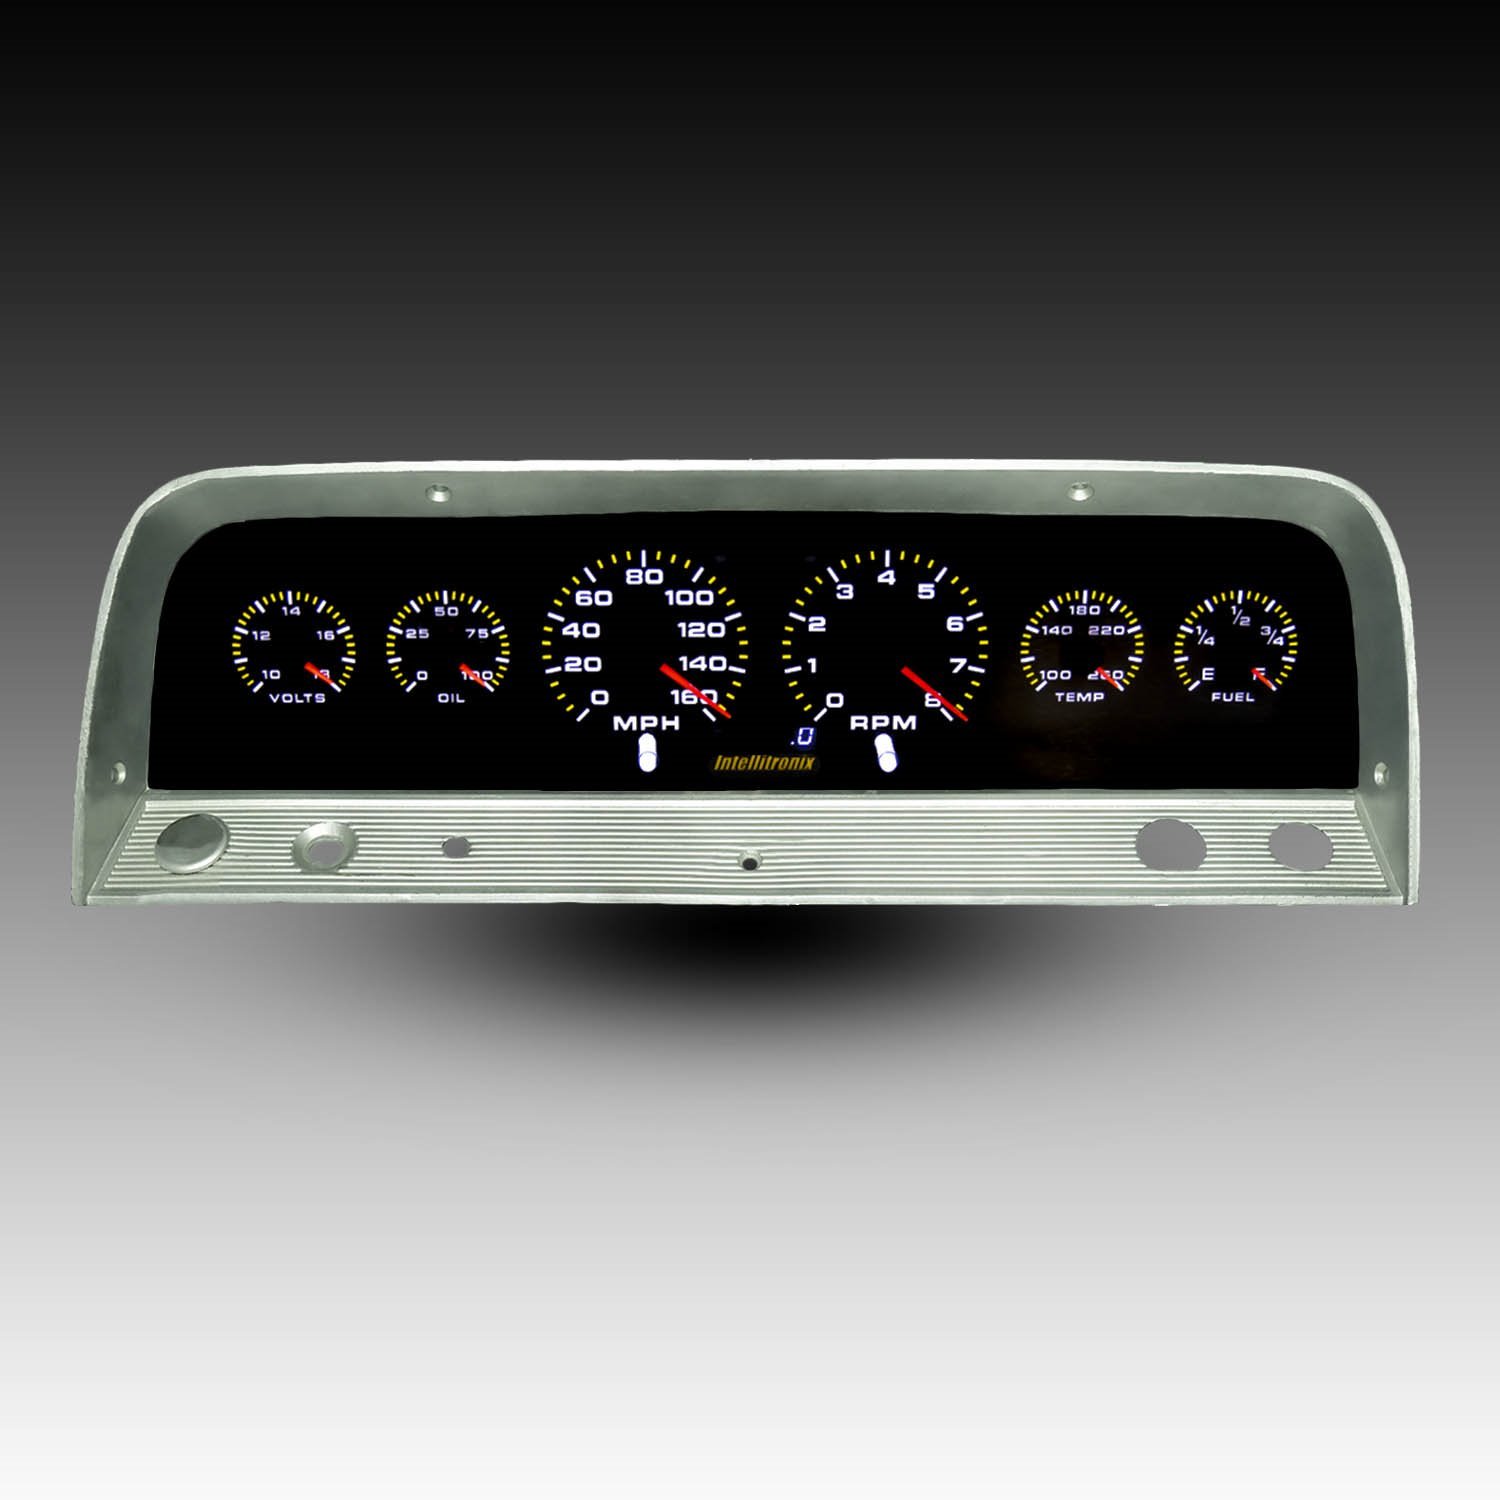 AP6002-S9020 Analog Gauge Panel, 1964-1966 Chevy Truck, With GPS SendIng Unit